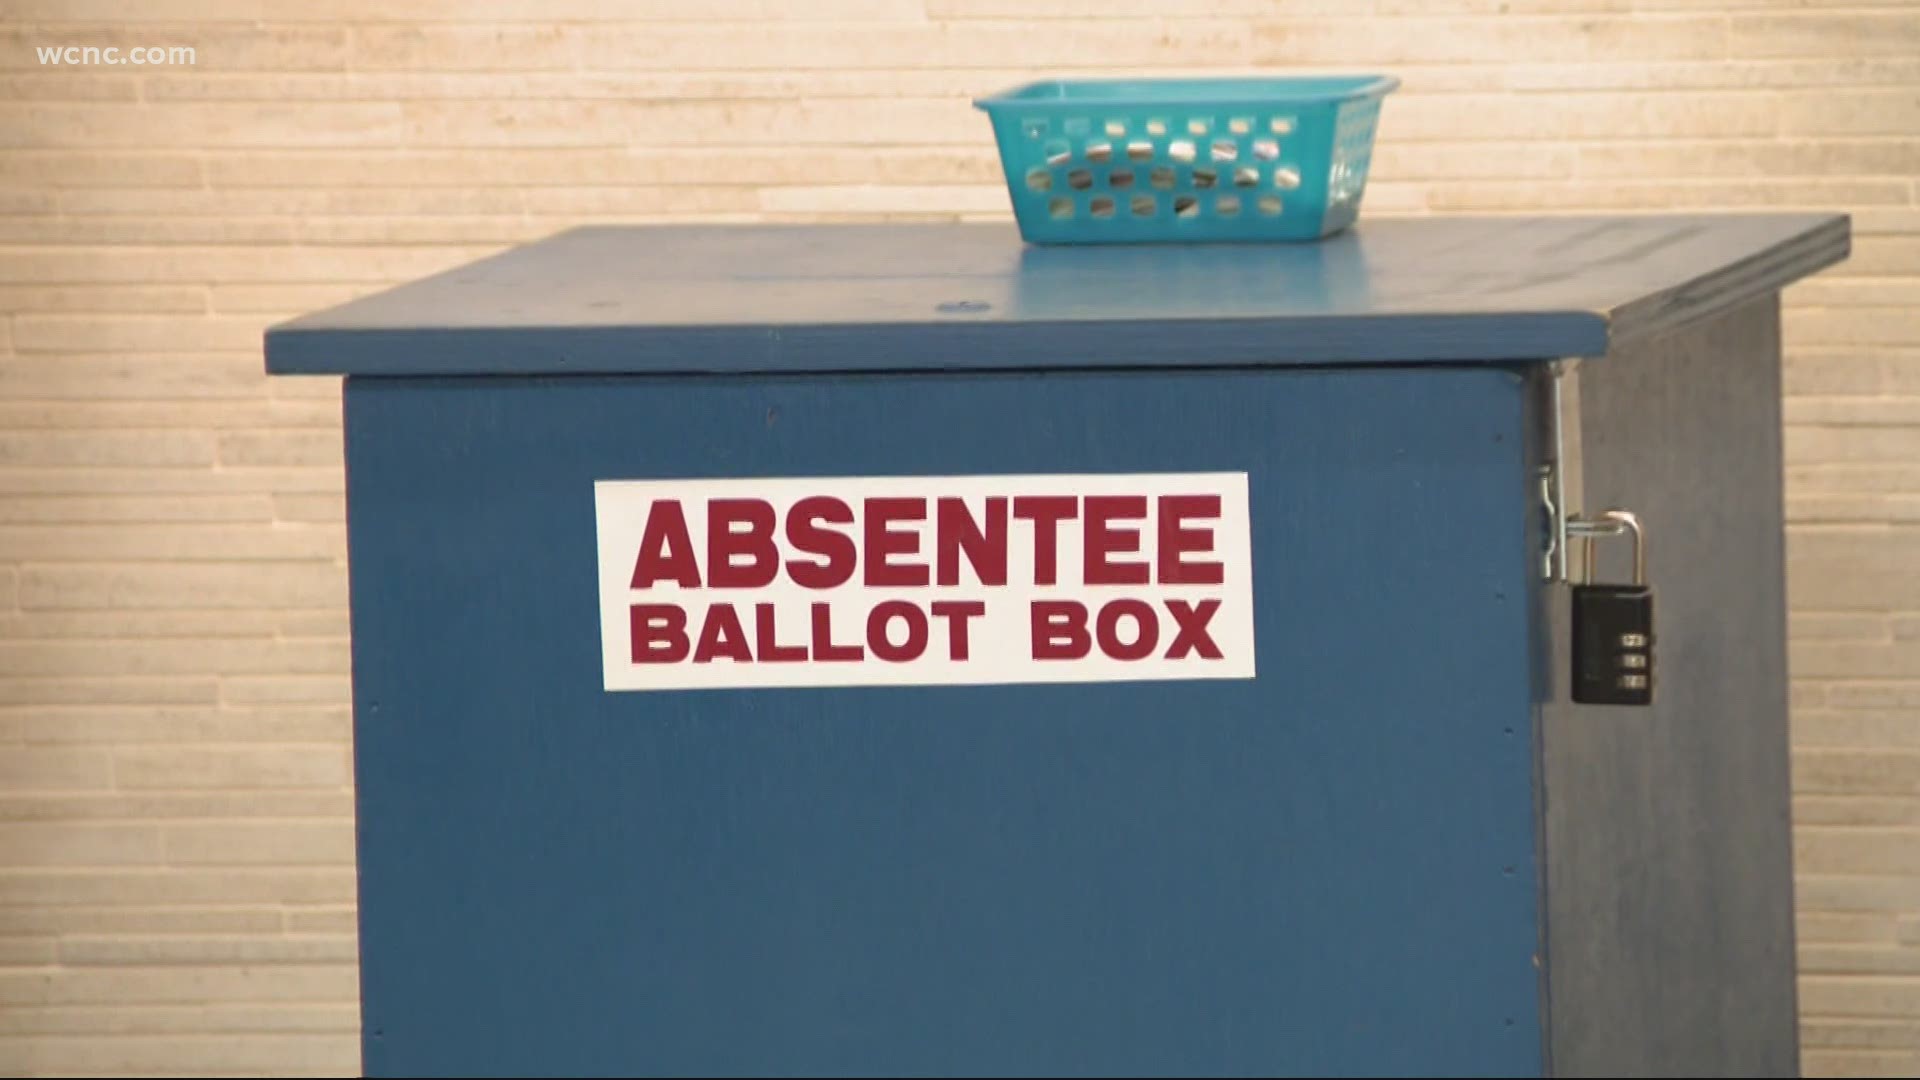 After thousands of absentee ballots with mistakes were hanging in limbo, the state Board of Elections finally gave guidance on how to fix them.